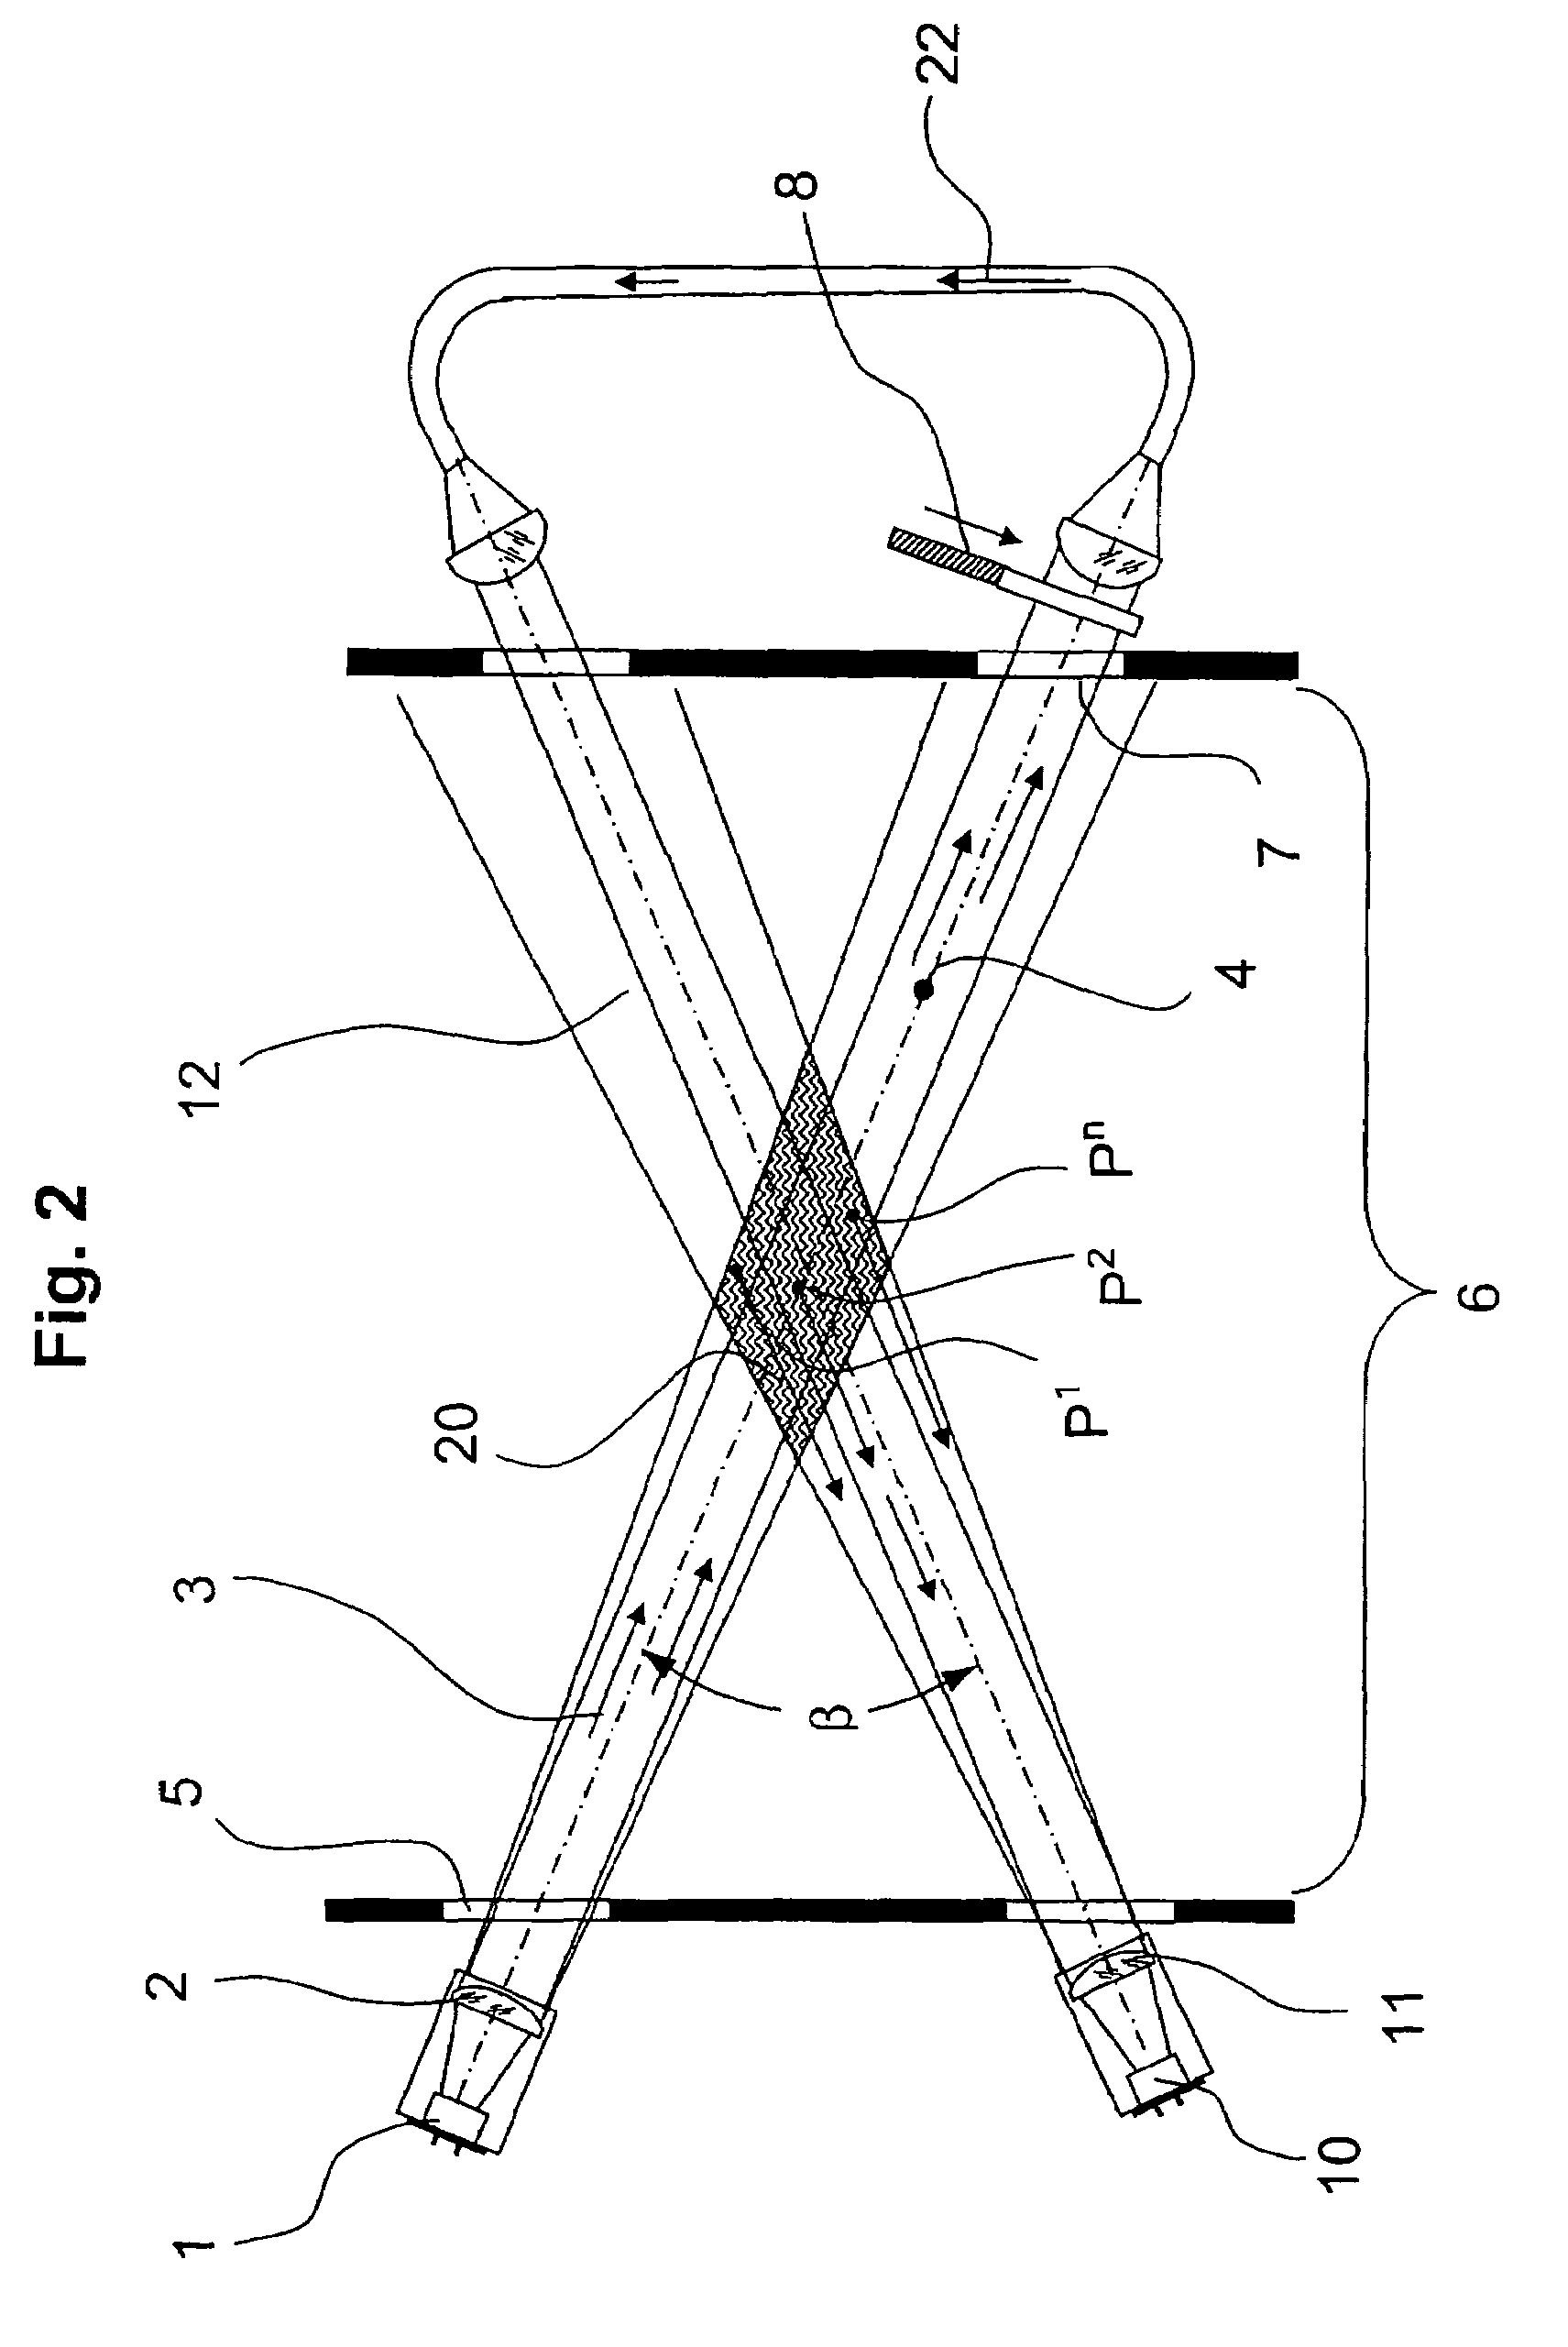 Scattered light range of view measurement apparatus